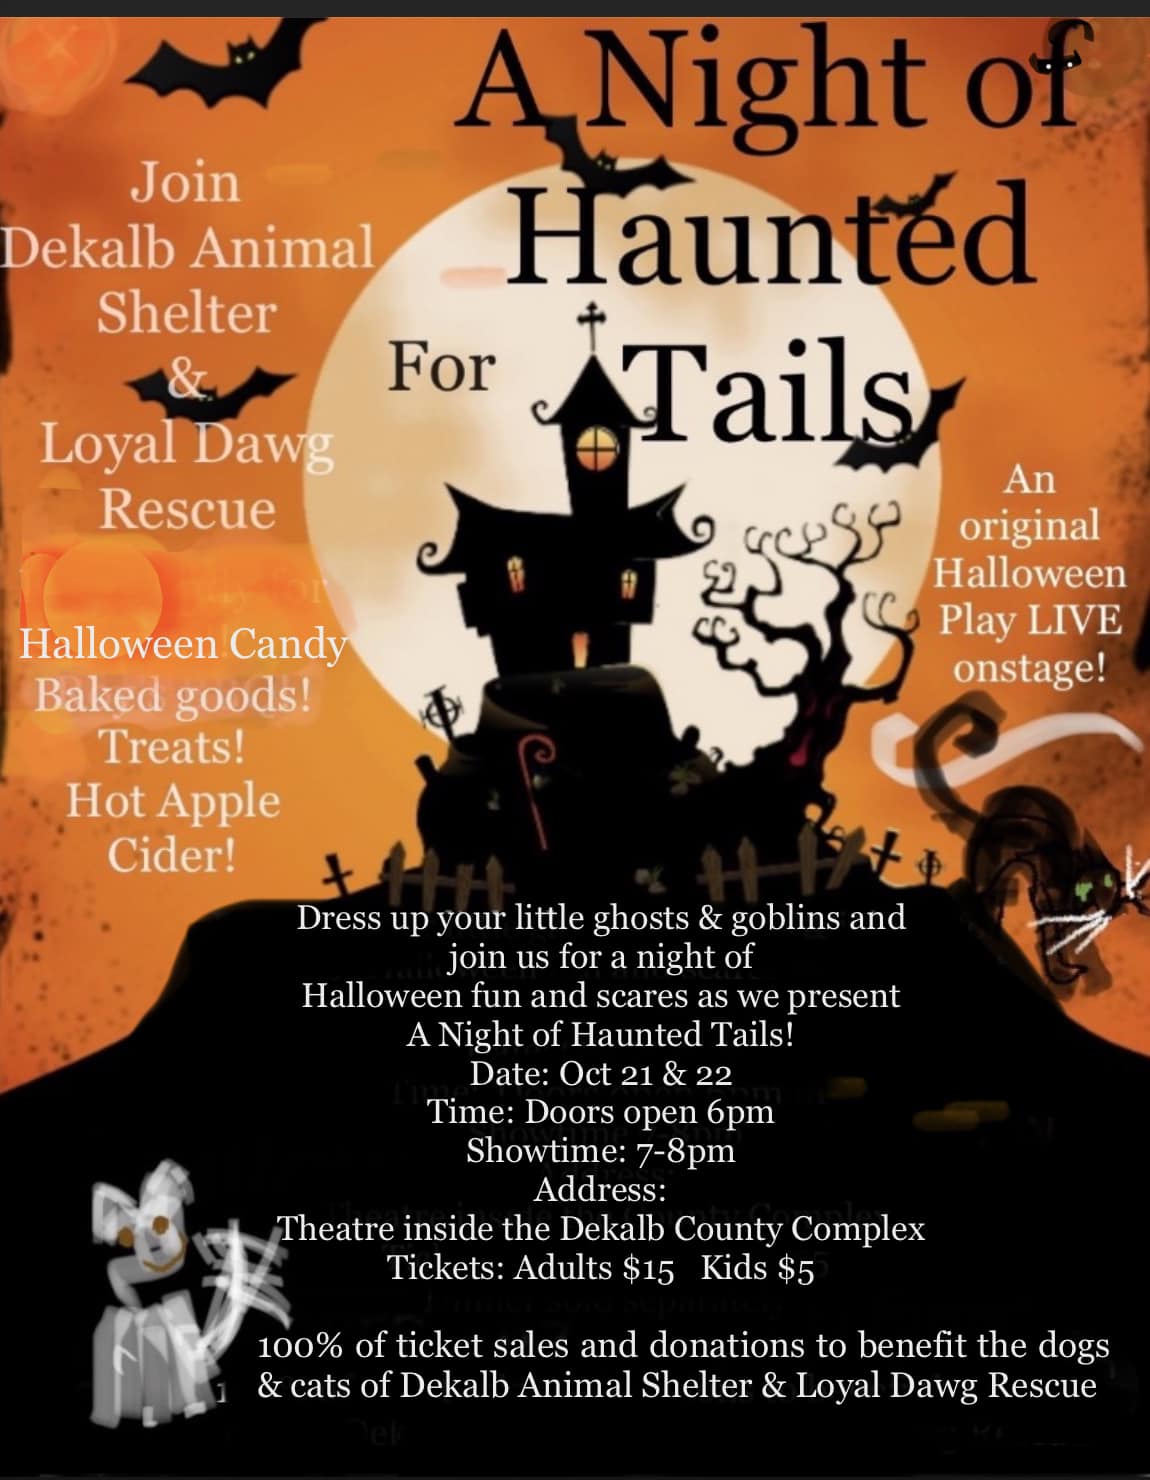 Join the DeKalb Animal Shelter and Loyal Dawg Rescue for a Night of Haunted Tails on October 21 & 22.